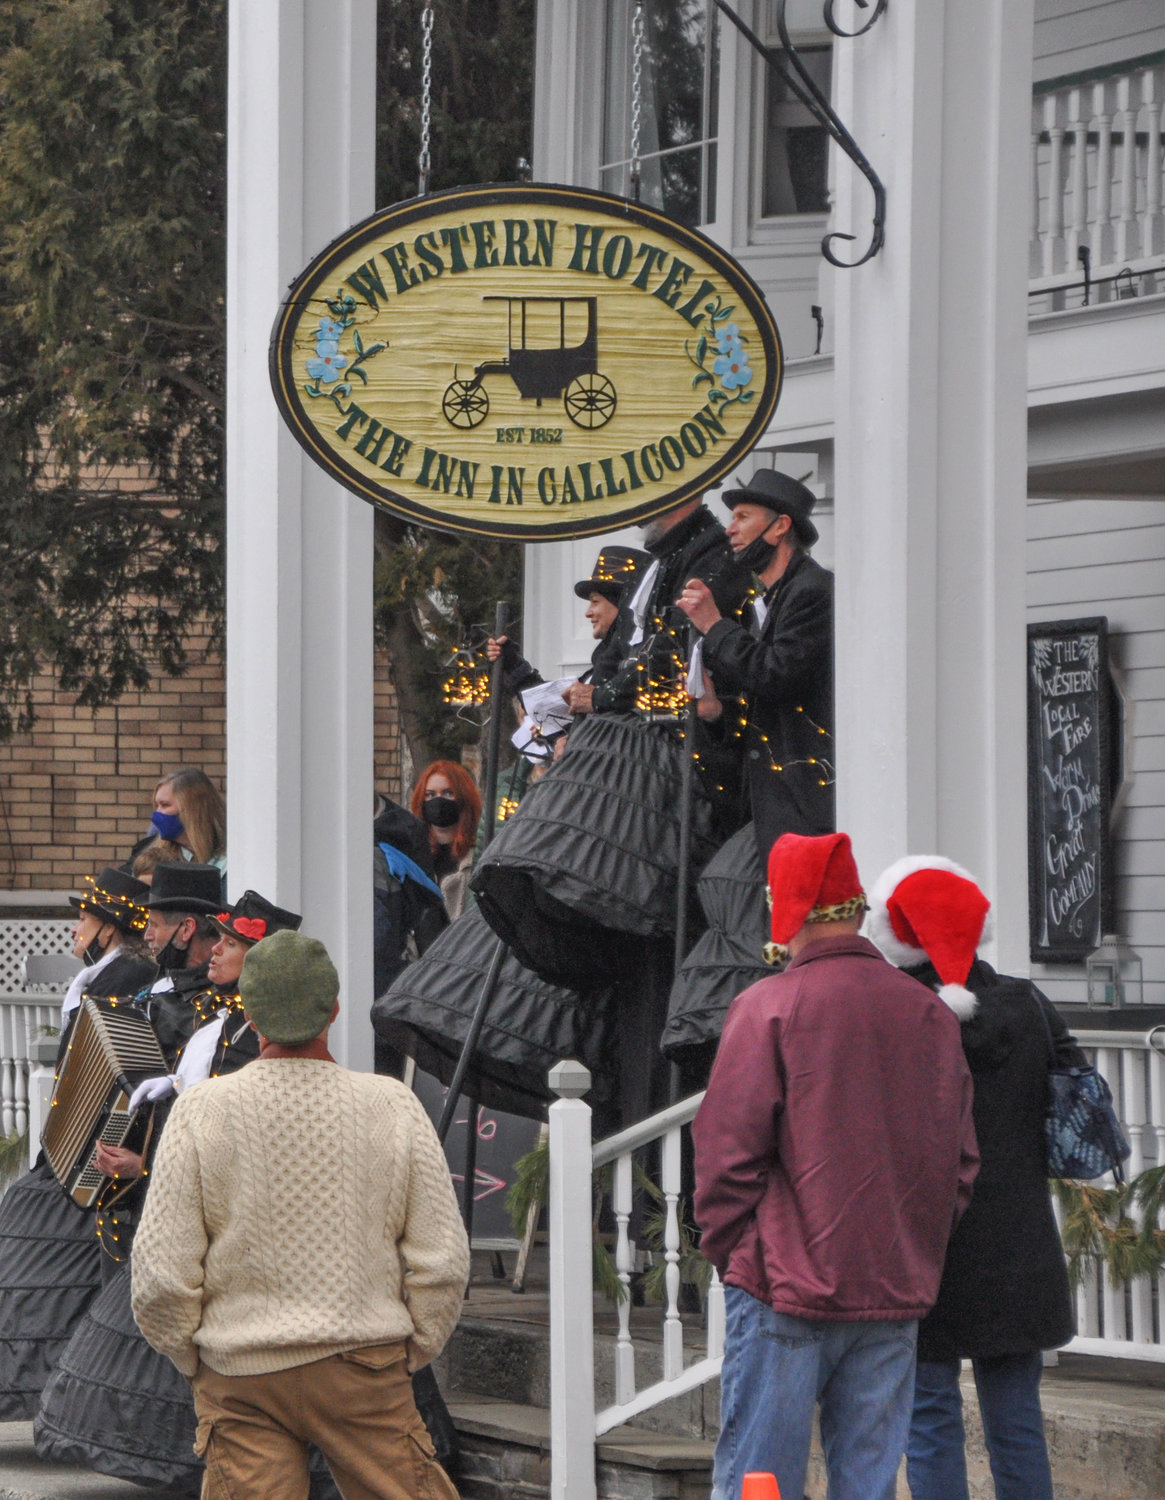 The Farm Arts Collective lightened up considerably while caroling on the steps of the historic Western Hotel.